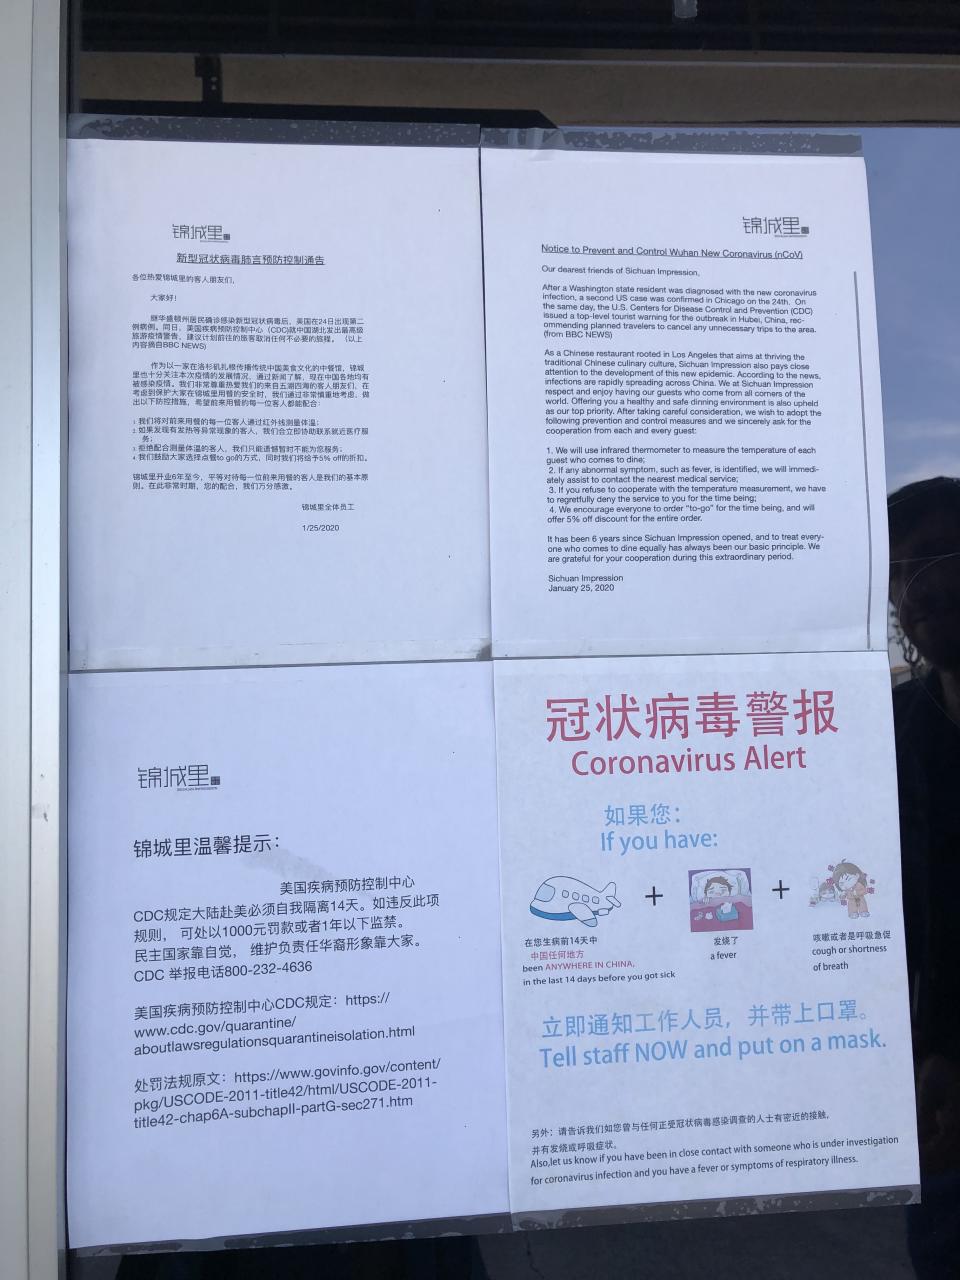 A coronavirus warning sign posted in the window of Sichuan Impression in Tustin, California (Kat De Angelis)